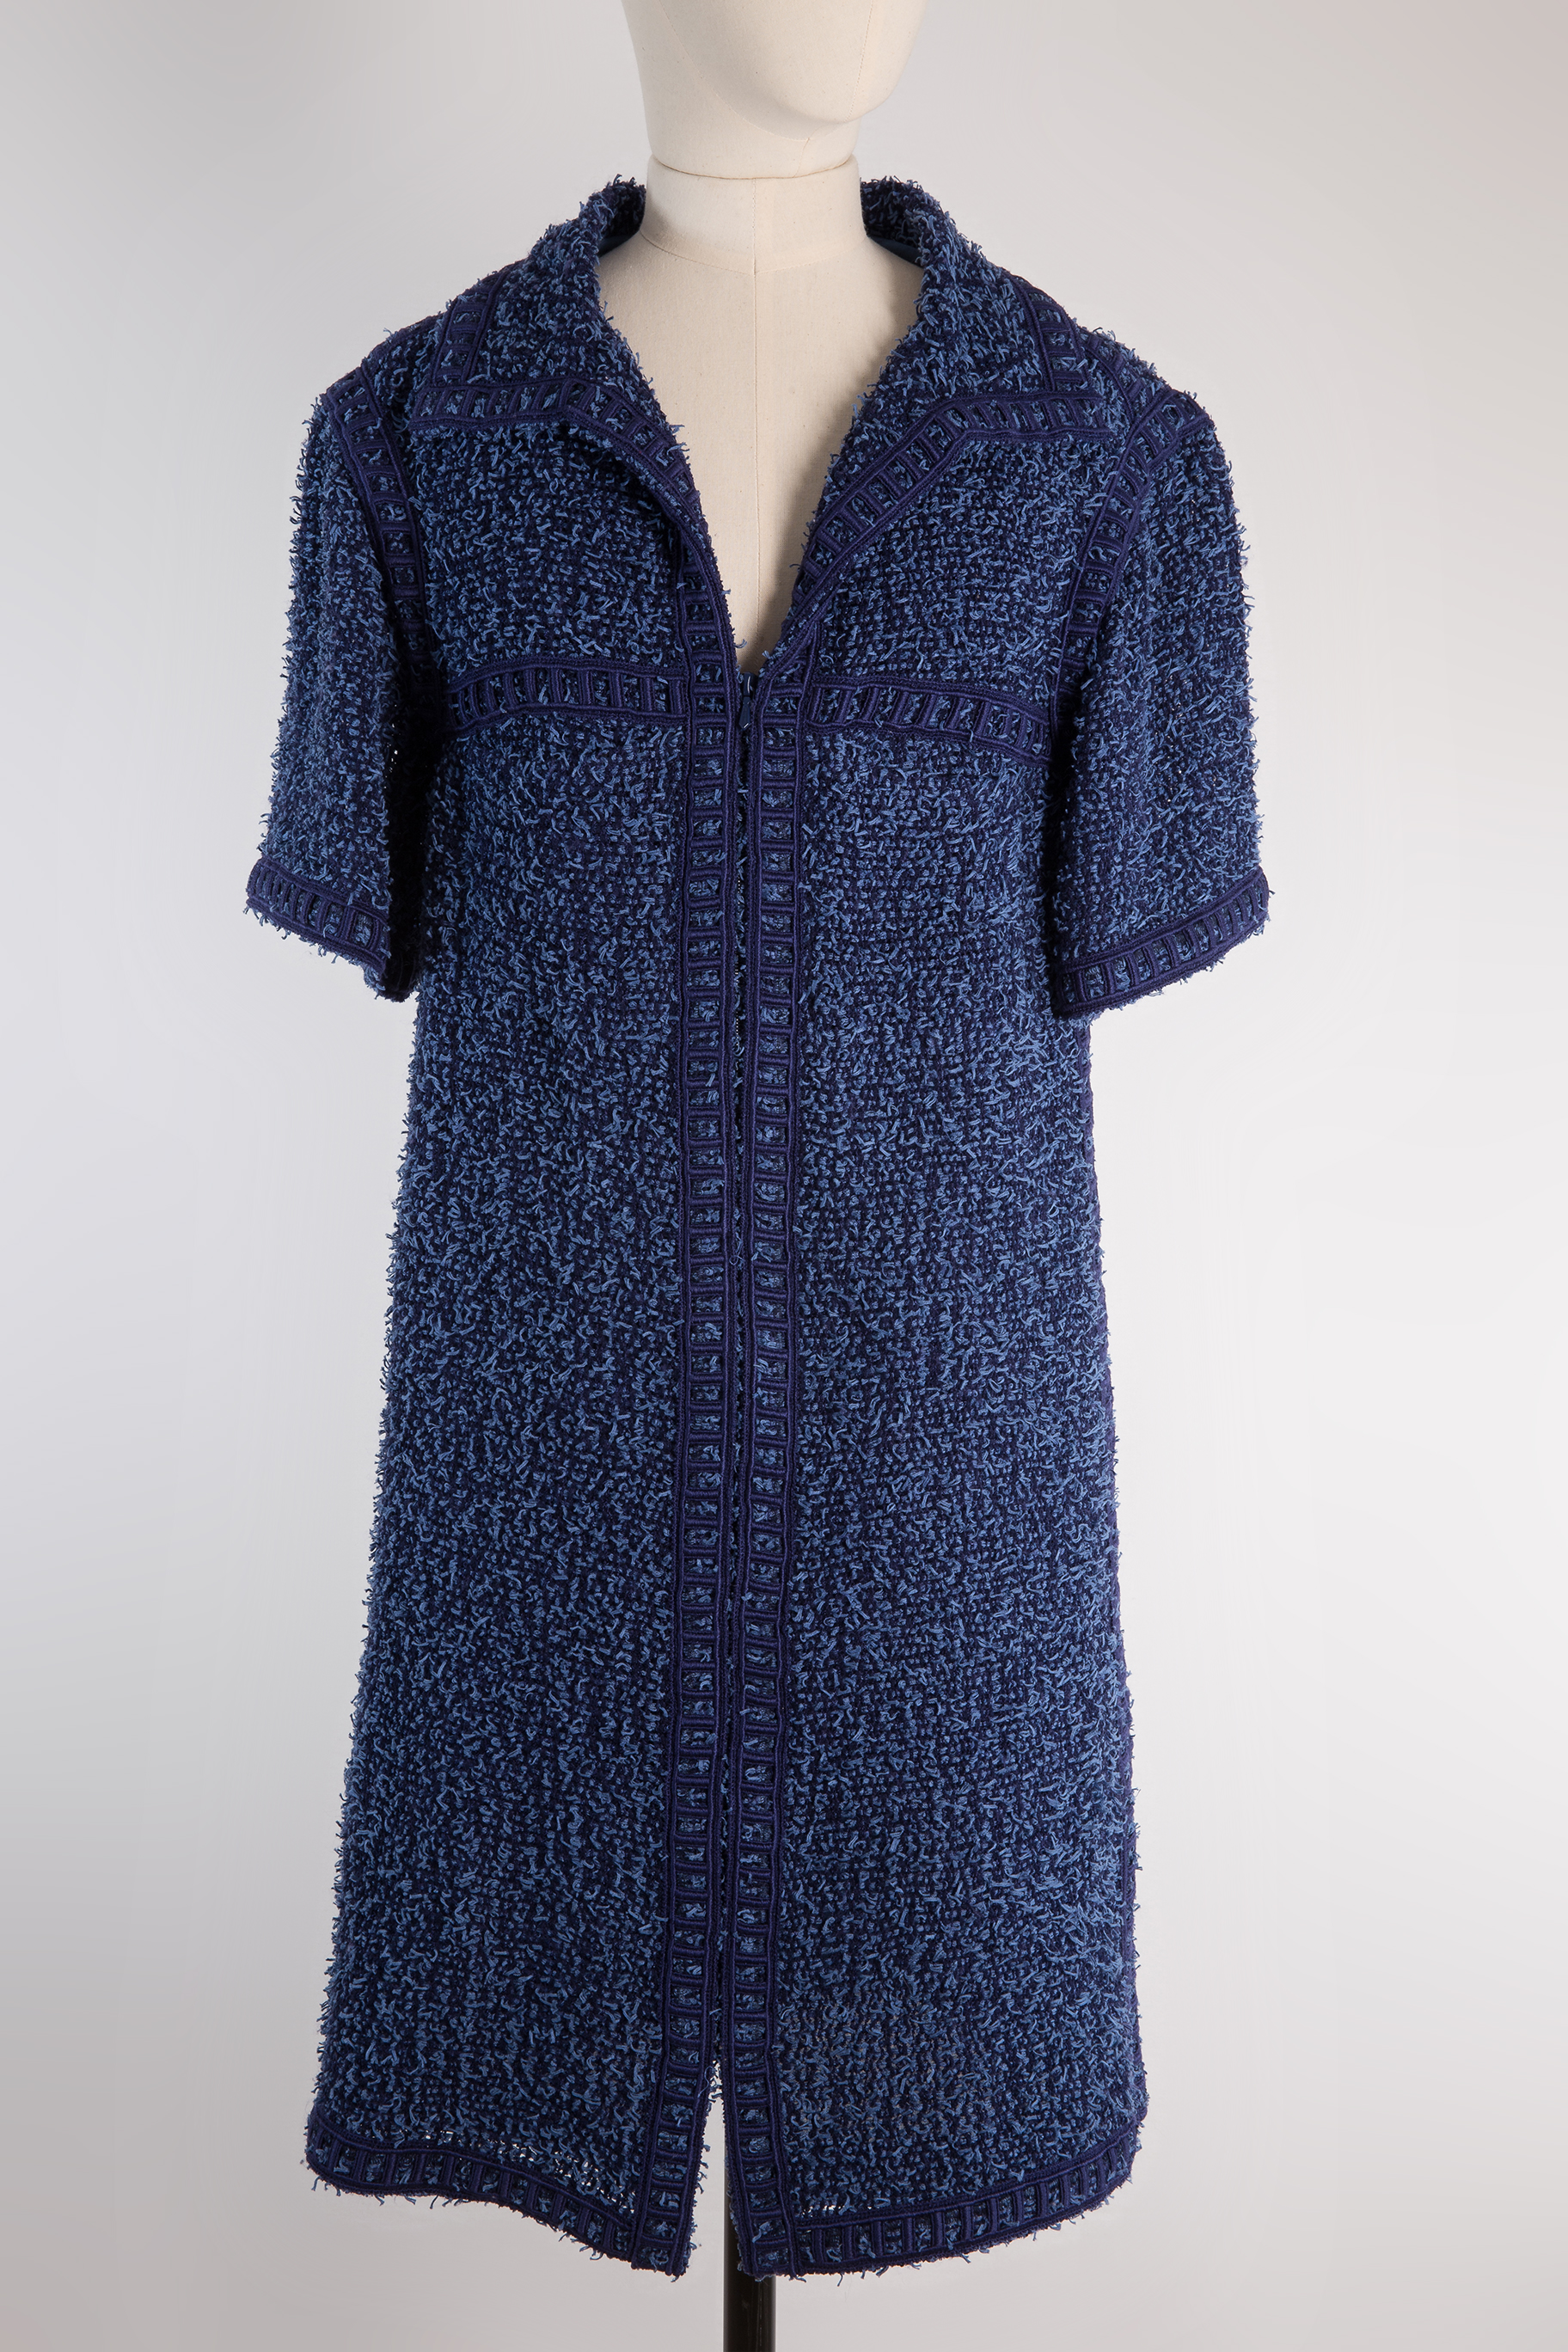 Chanel Tweed dress, FR34 - Huntessa Luxury Online Consignment Boutique